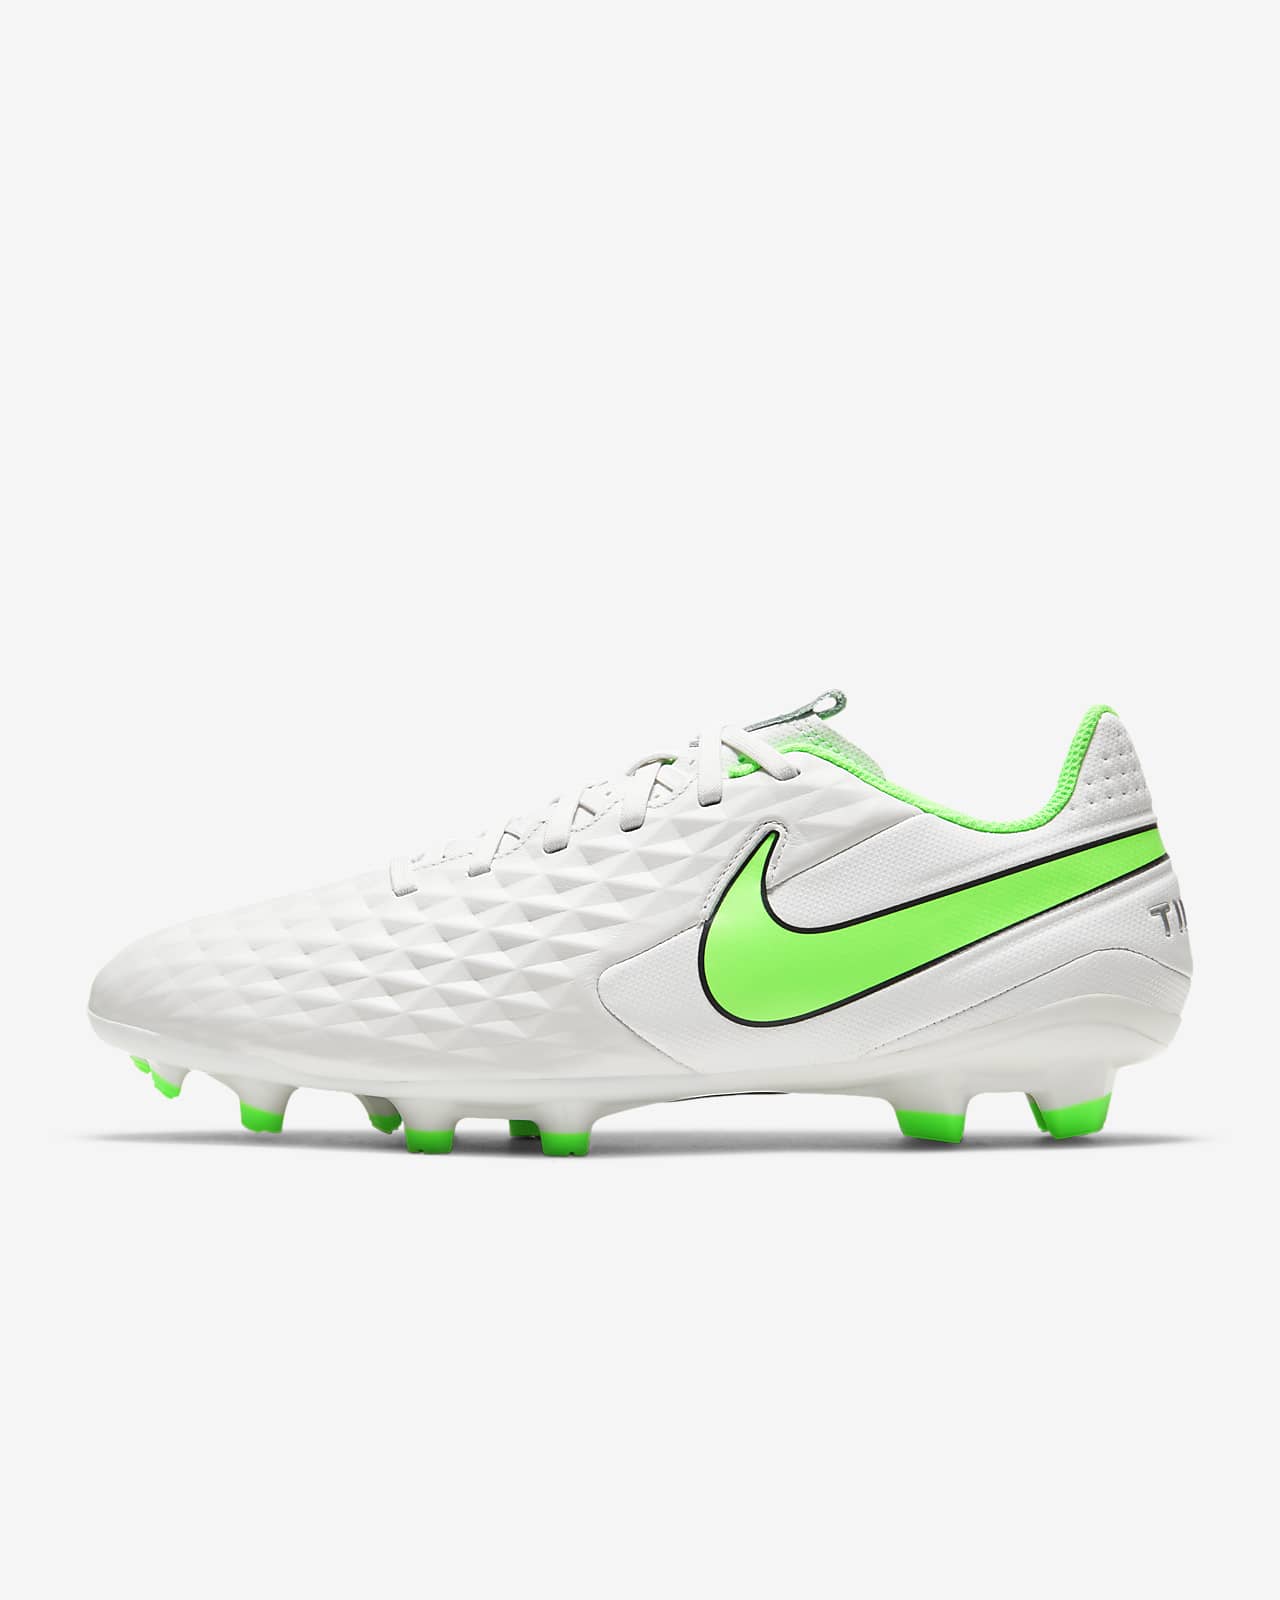 Nike Tiempo Legend 8 Academy MG Multi-Ground Soccer Cleats